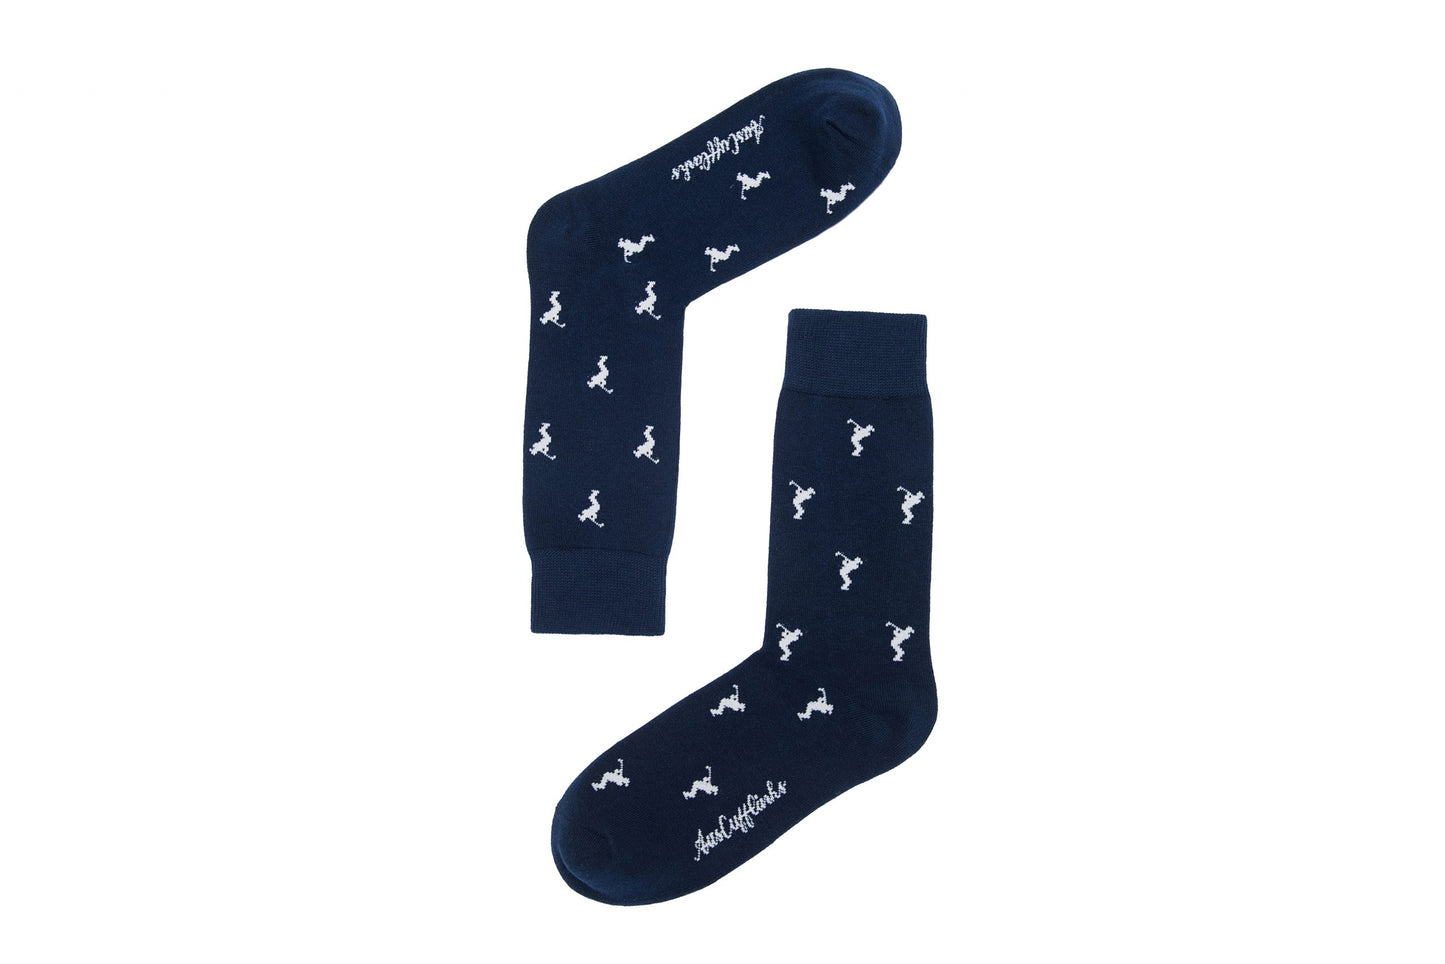 A pair of Golf Swing Socks with white birds on them.